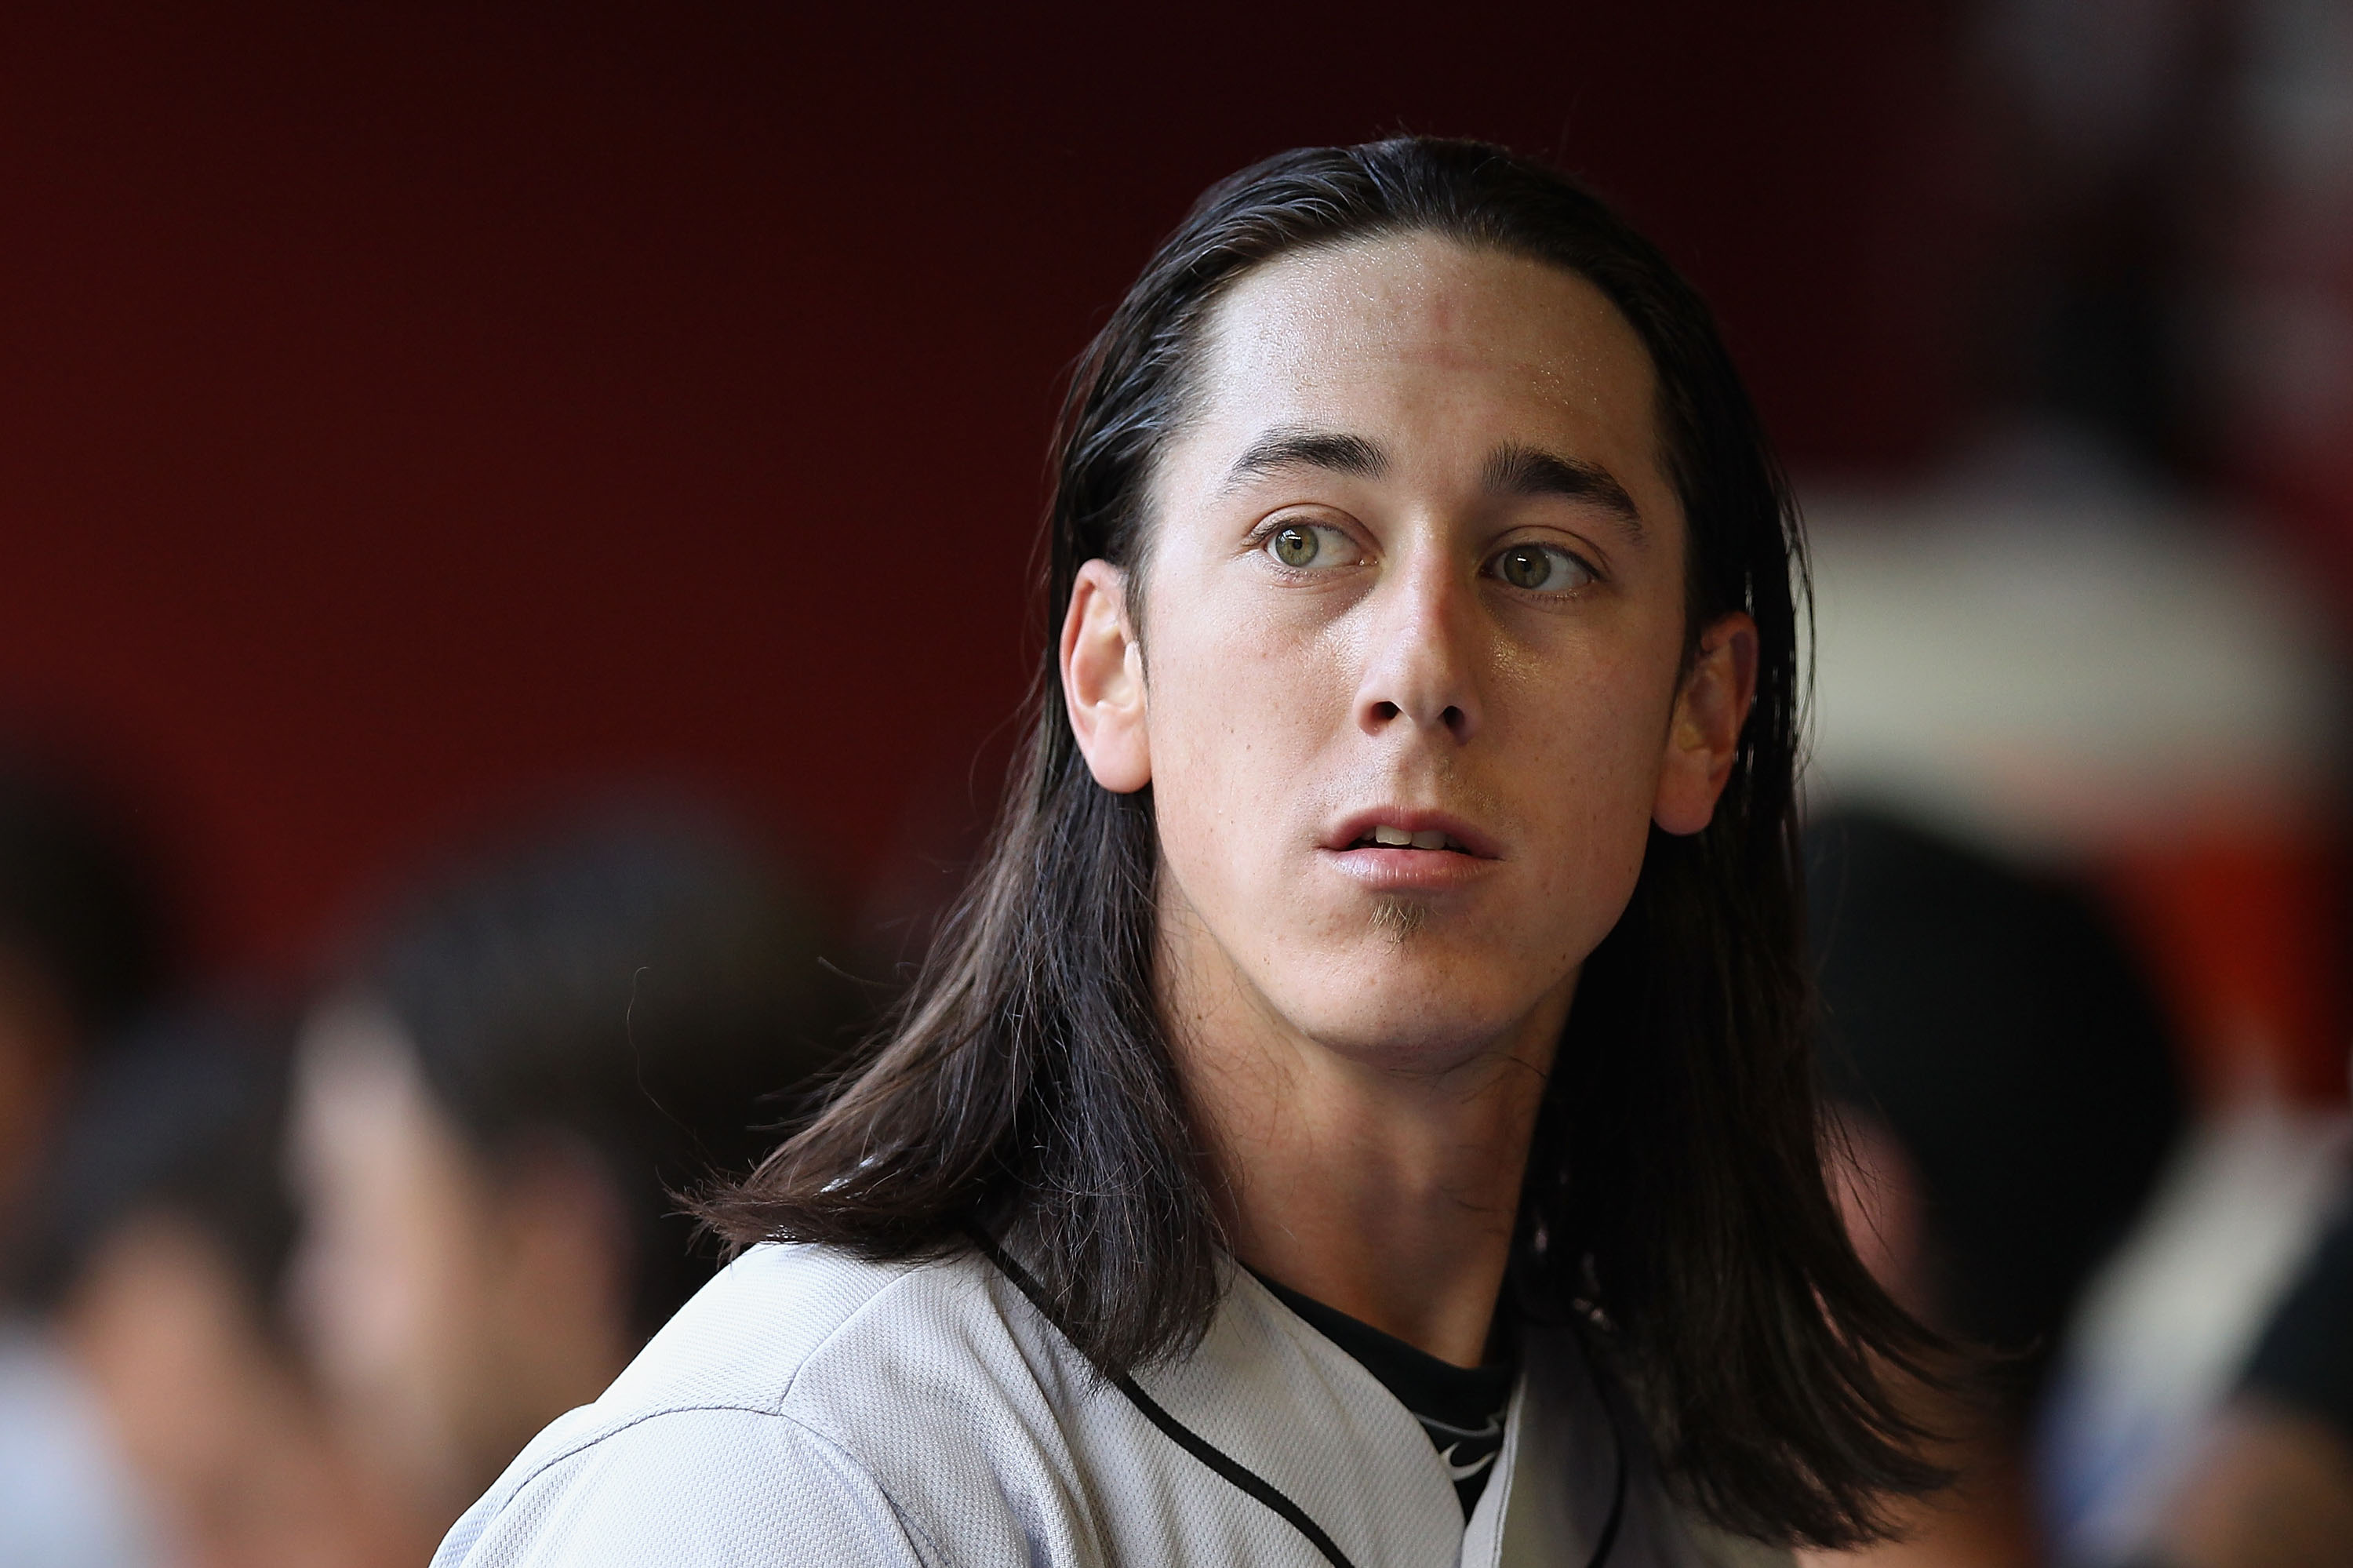 San Francisco Giants: How Big of a Deal Are Tim Lincecum's Recent